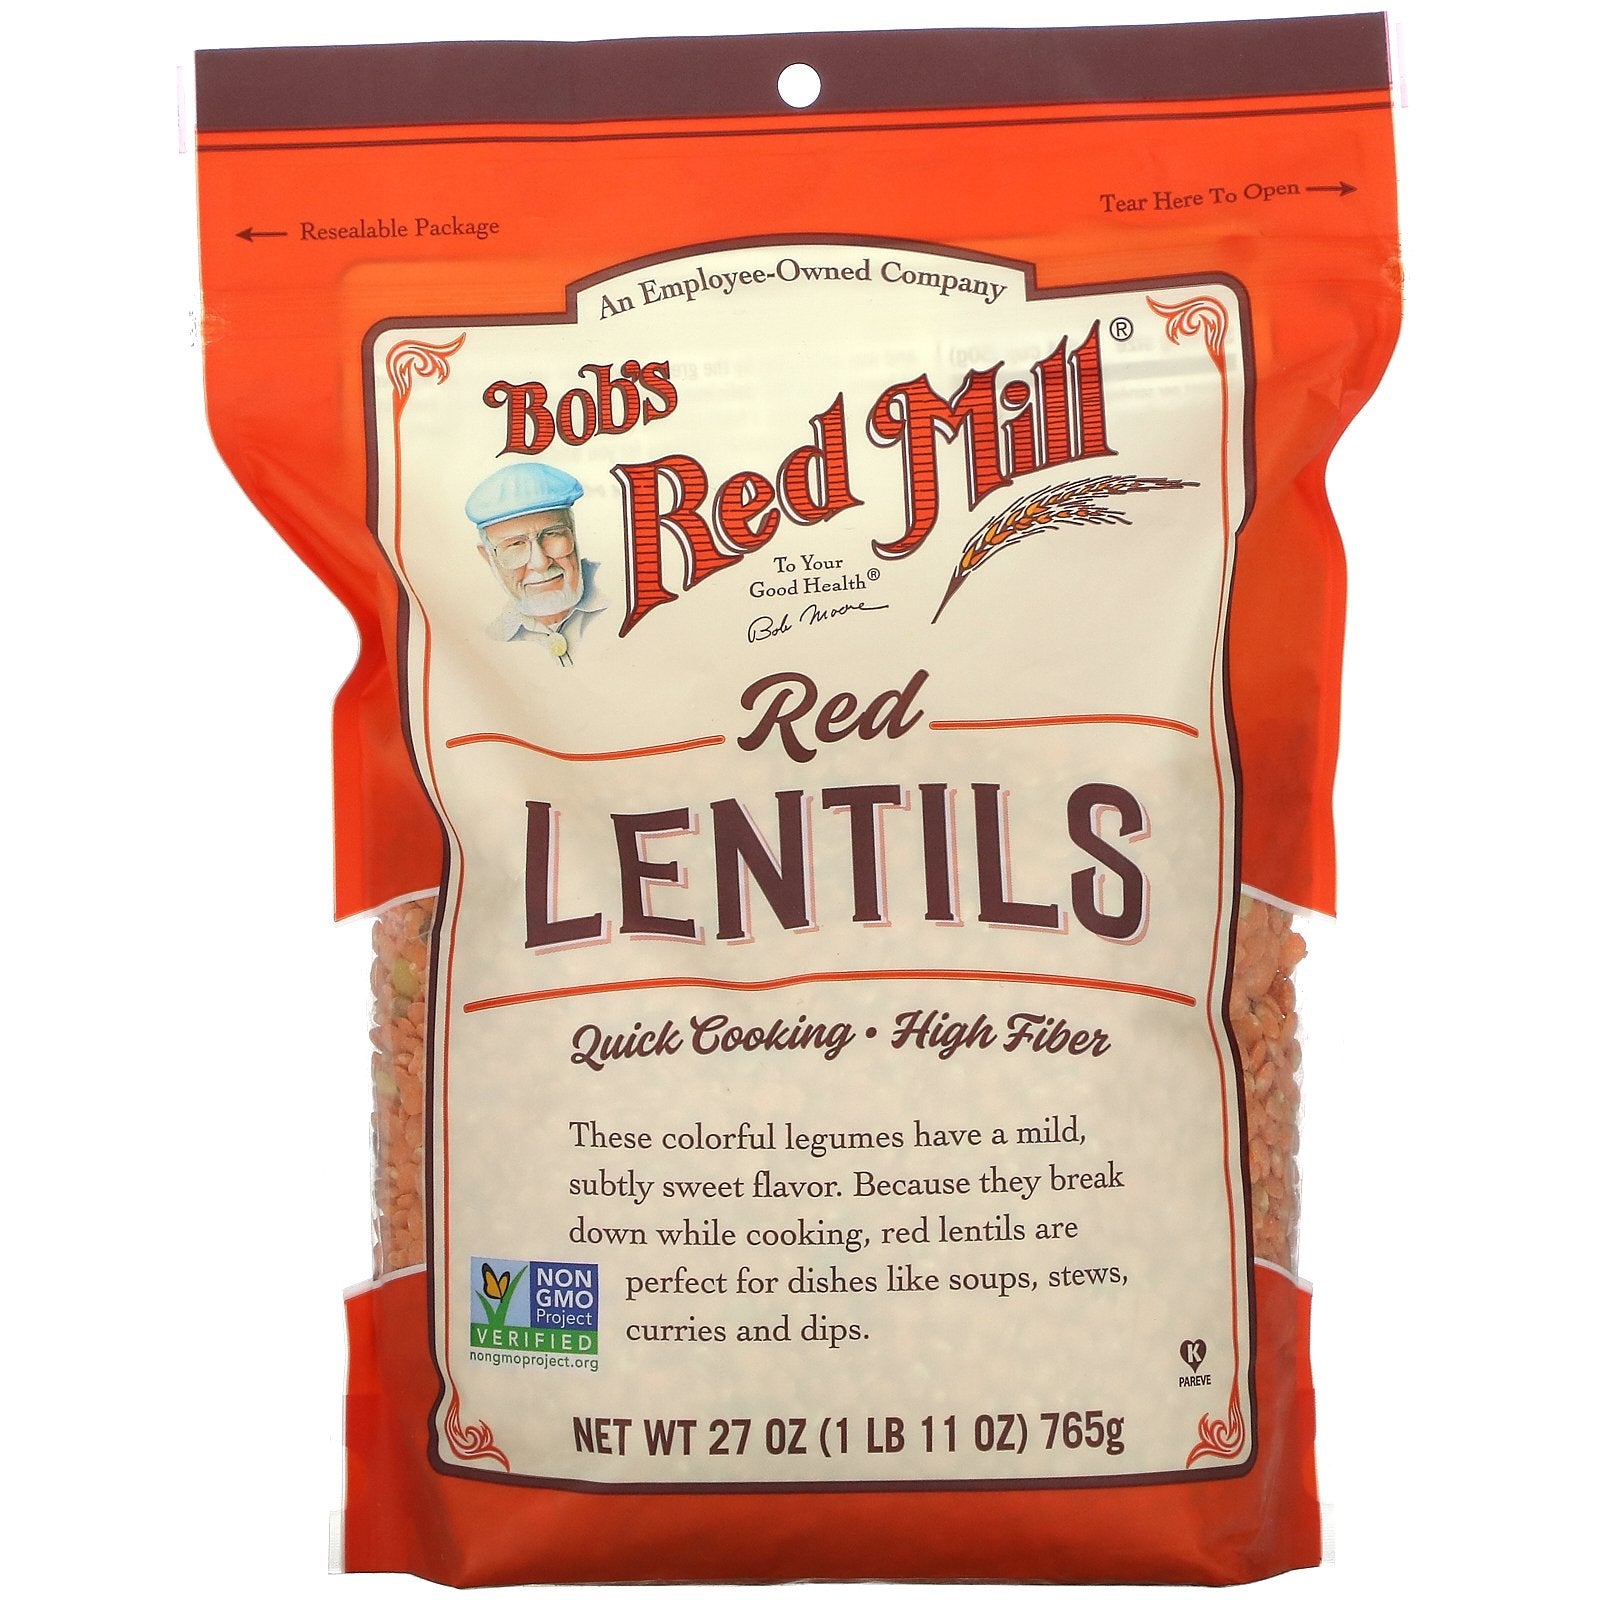 Bob's Red Mill, Red Lentils Heritage Beans, 27 oz (765 g)